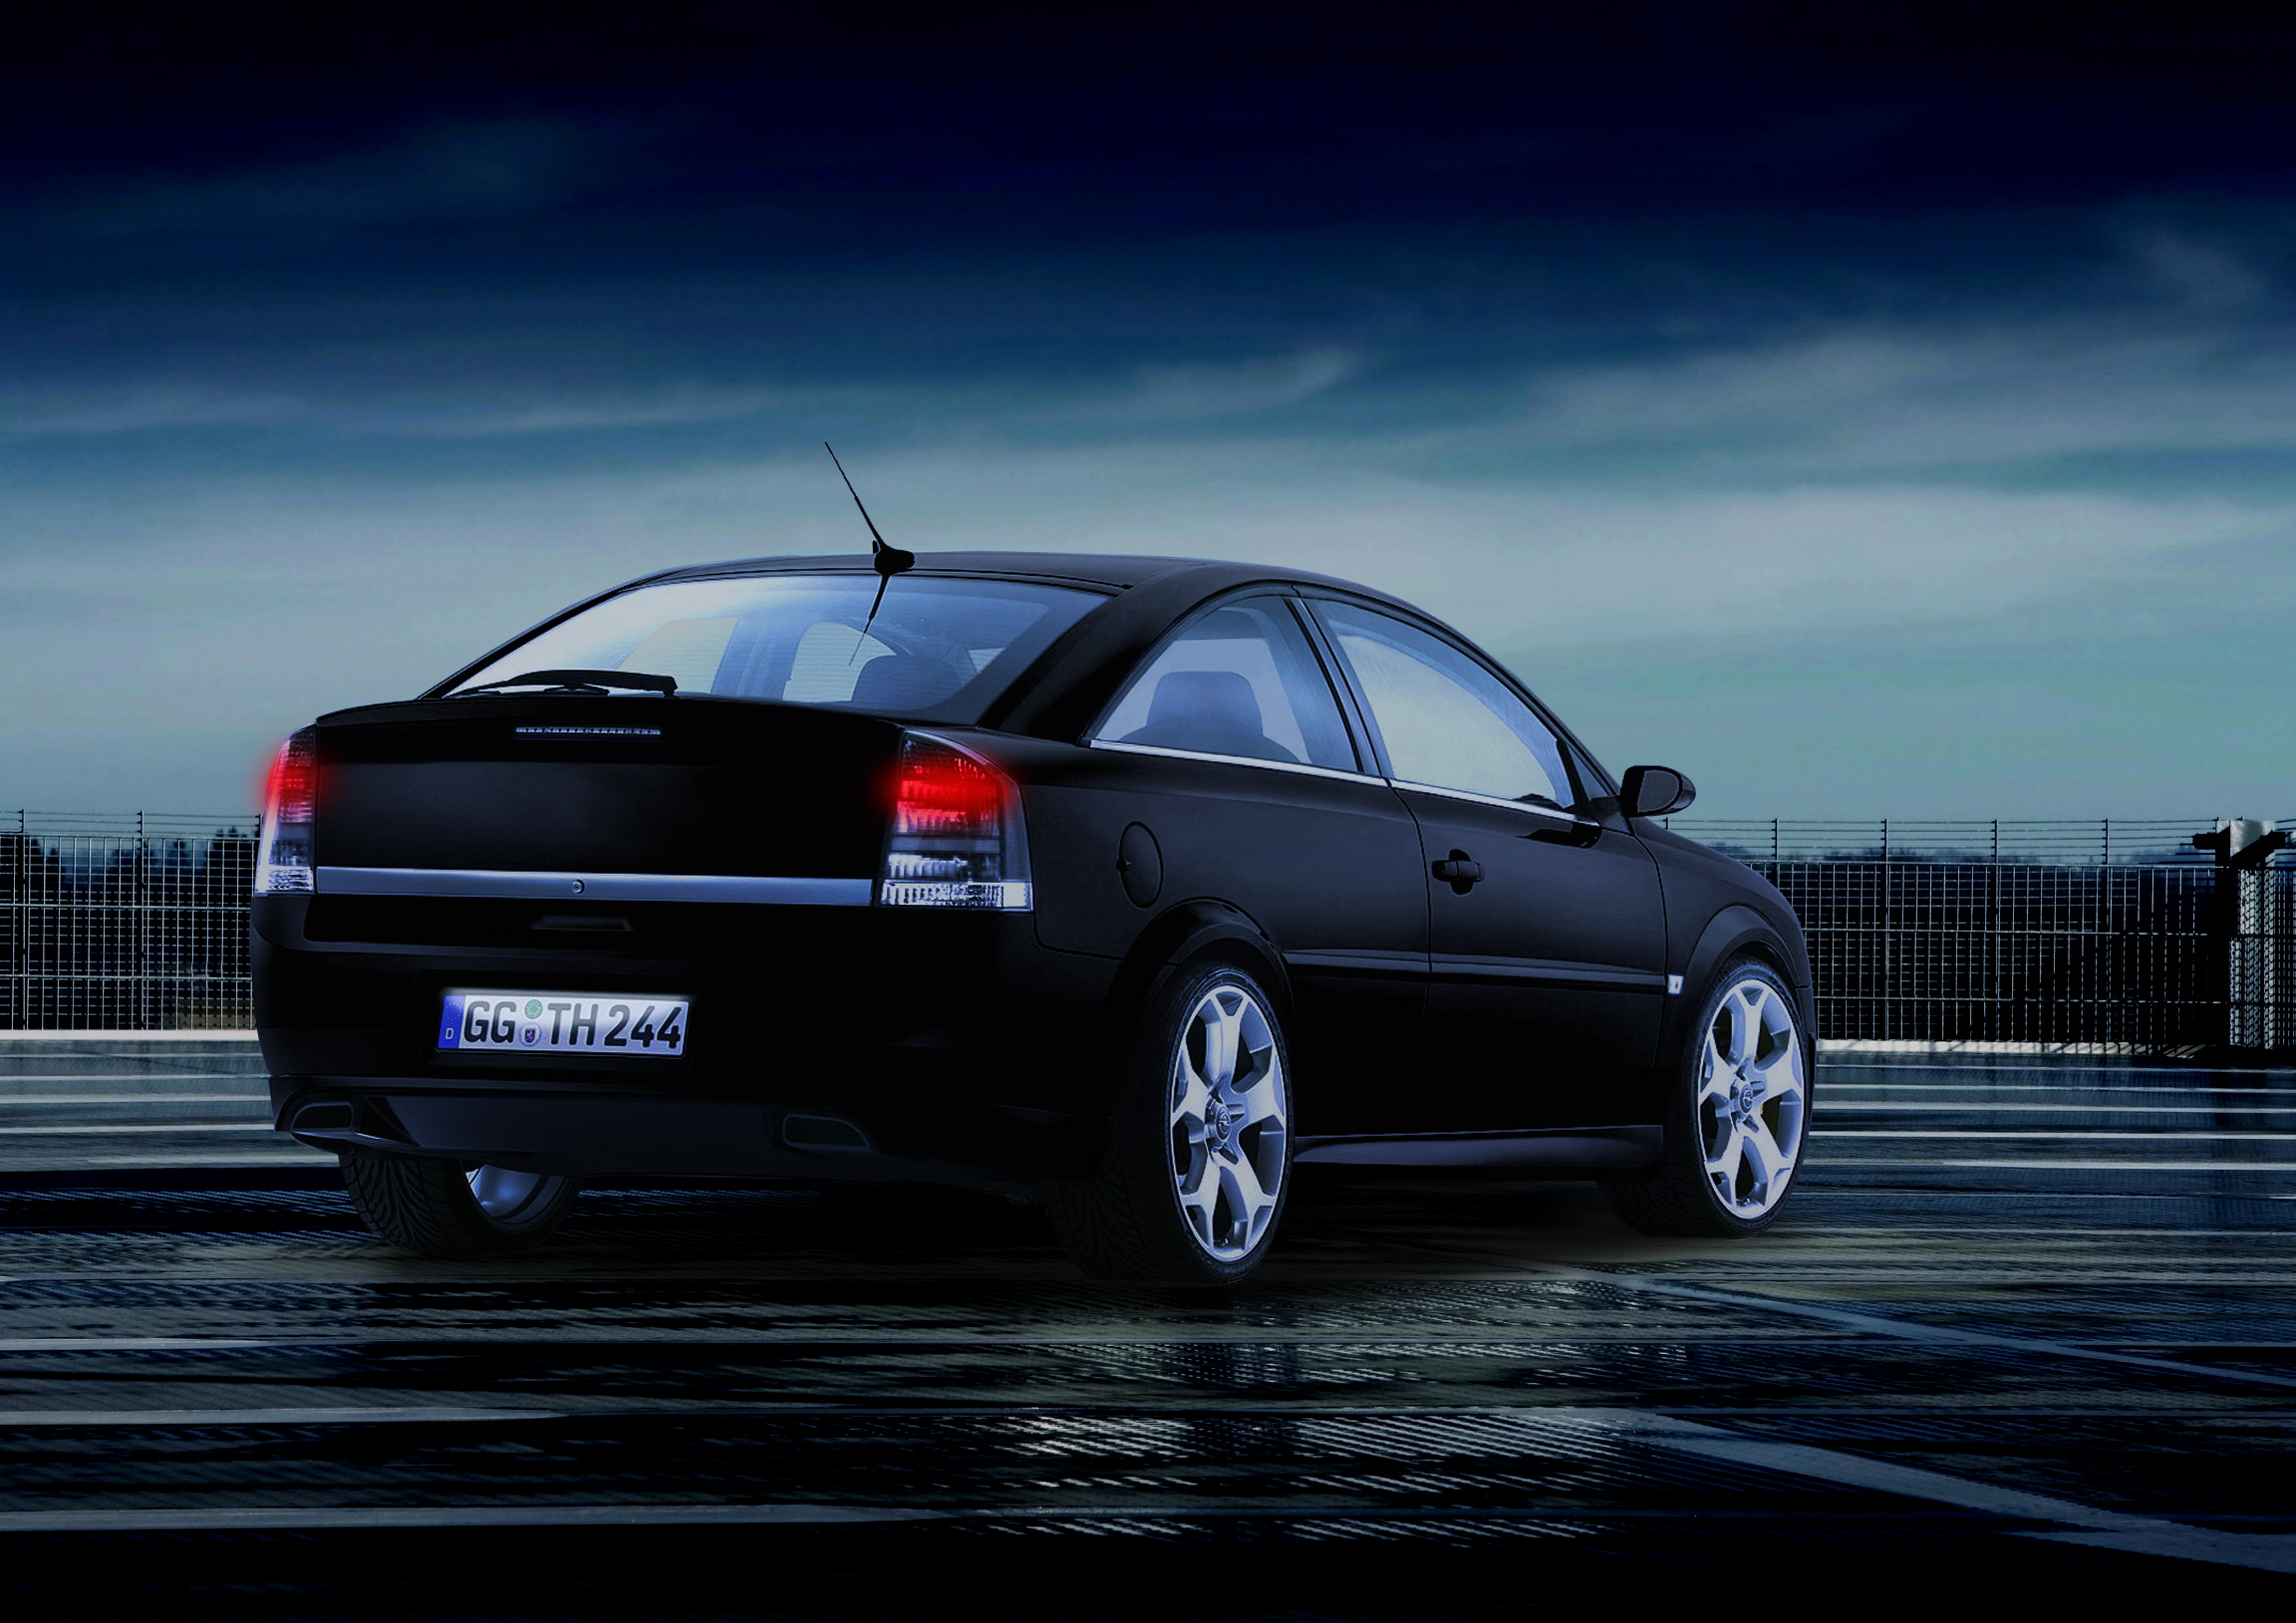 Pictures von opel corsa c tuning autos tuning car opel hd wallpapers